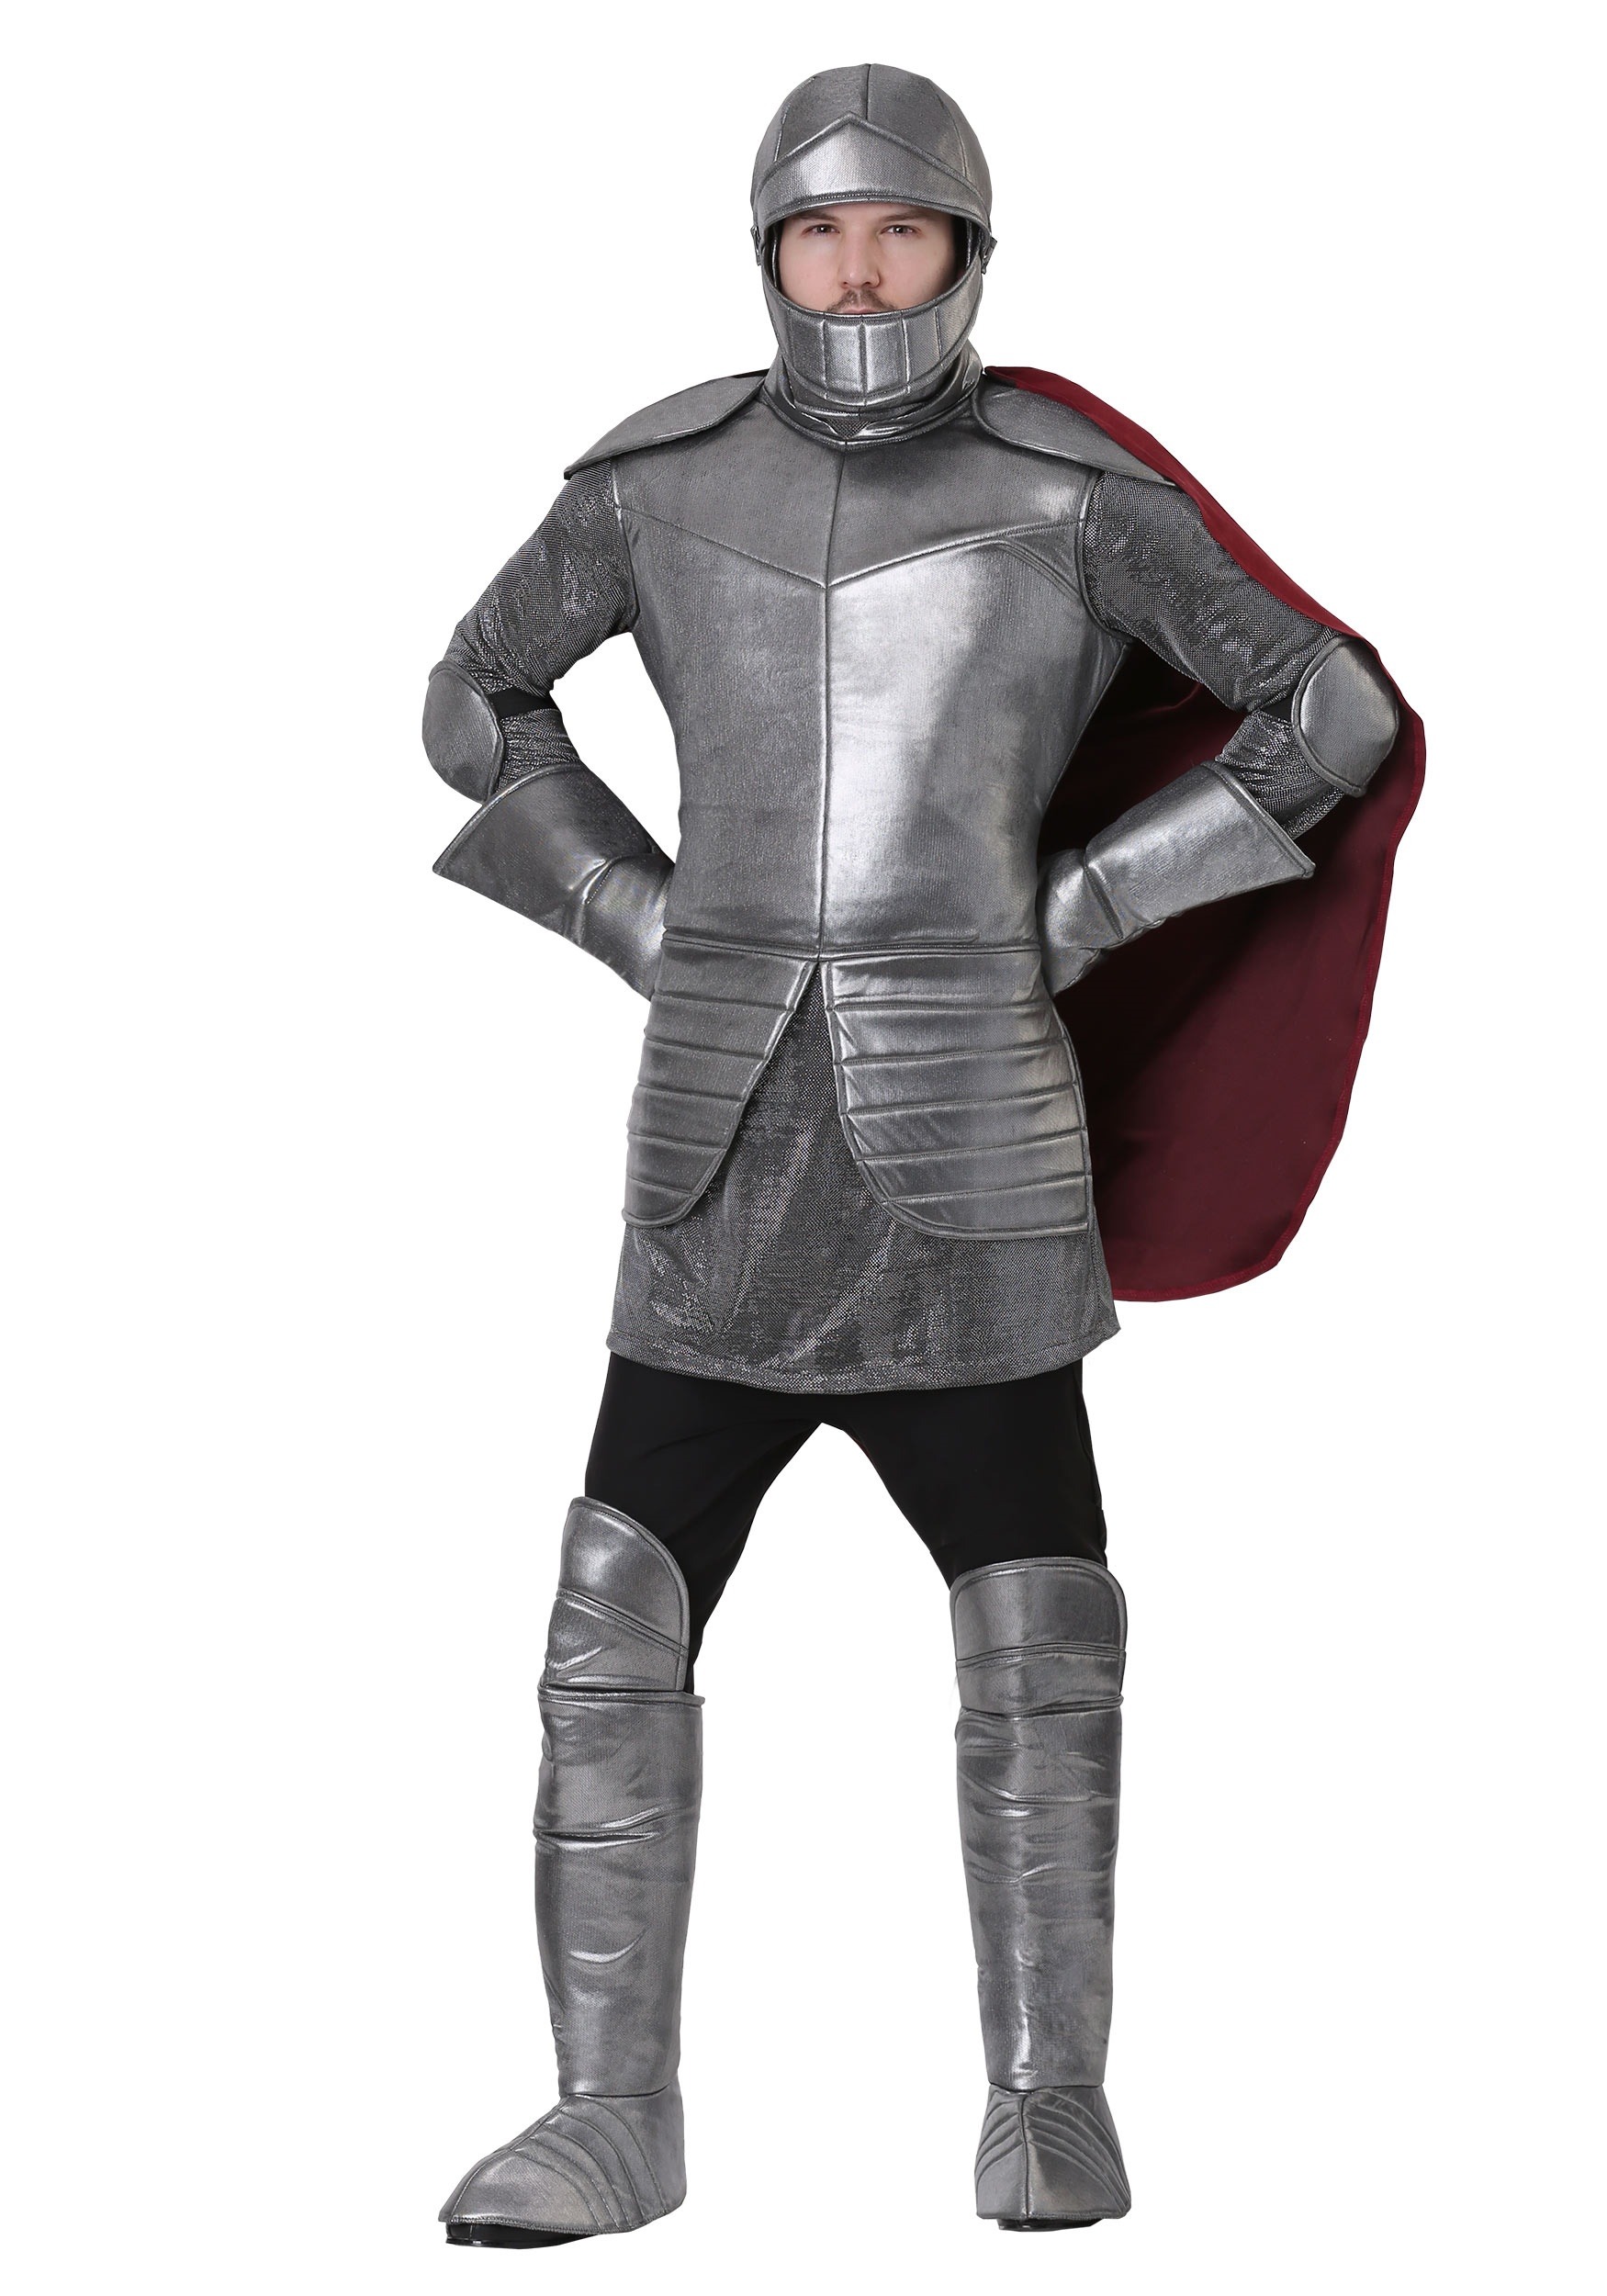 Photos - Fancy Dress ROYAL FUN Costumes Men's  Medieval Knight Costume Gray/Red 